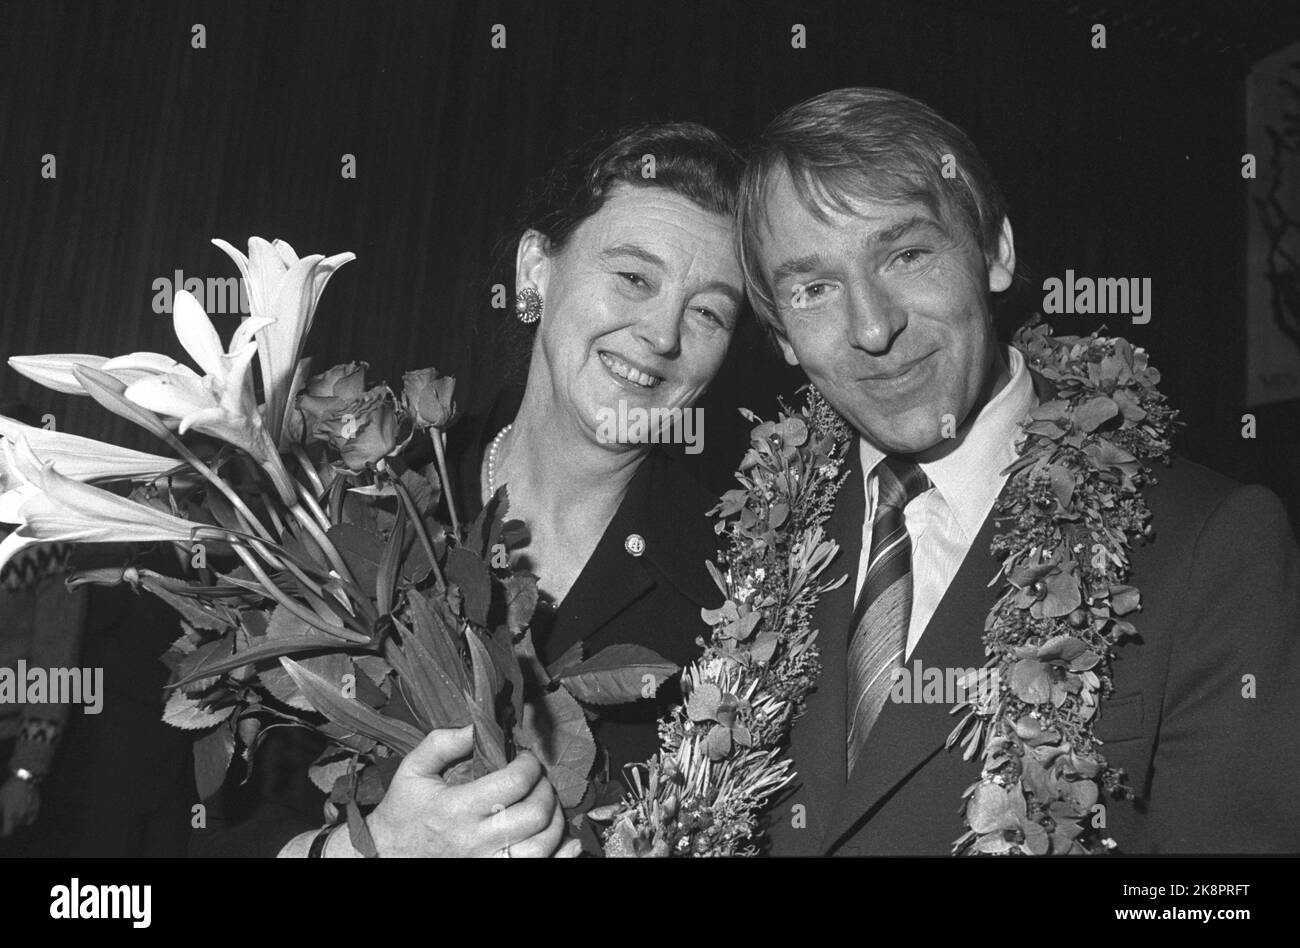 Oslo 19801024. Journalist Arne Fjørtoft has been awarded 'Tor Gjesdalspris' 1980 for his programs in NRK on the refugee problems and poverty in Africa and South Asia. Here he is congratulated by Anne Margrethe Gjesdal, who one year ago created the award in memory of her husband. The price is NOK 10,000. Photo: Henrik Laurvik / NTB Stock Photo